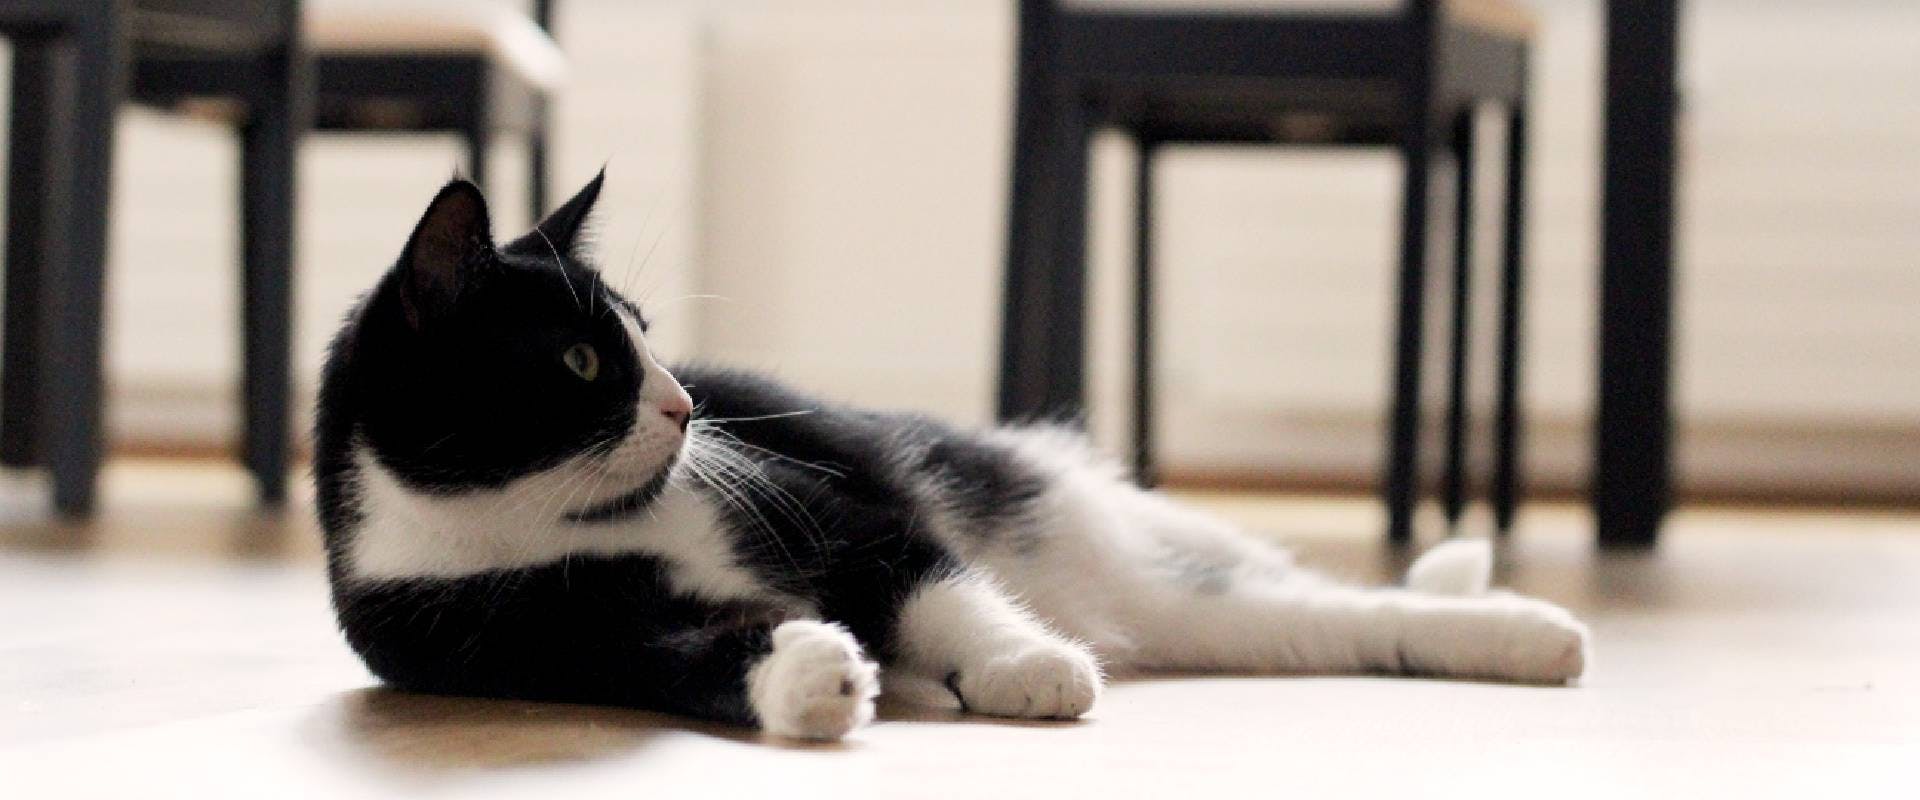 12 Black and White Cat Facts | TrustedHousesitters.com